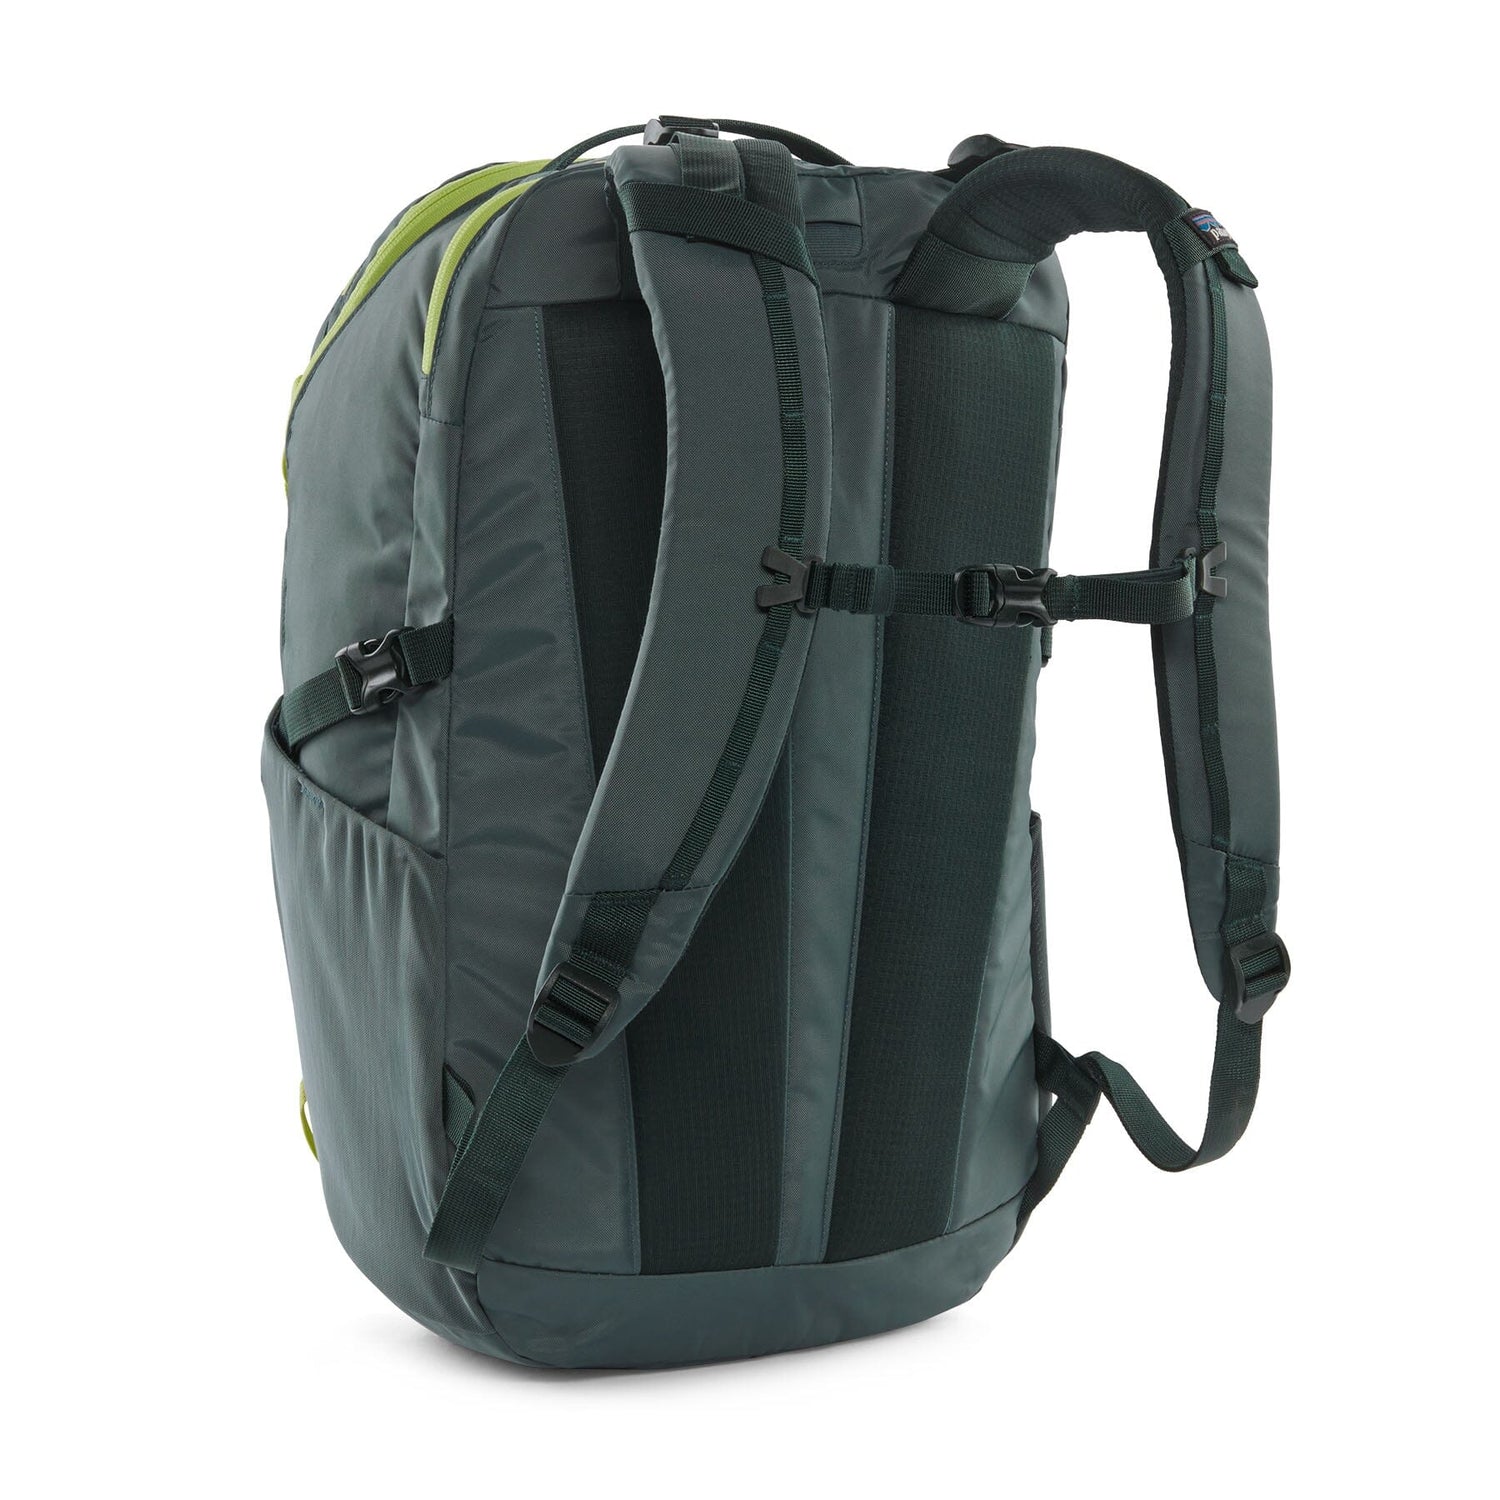 Patagonia Refugio Day Pack 30L - Recycled Polyester & Recycled Nylon Nouveau Green Bags